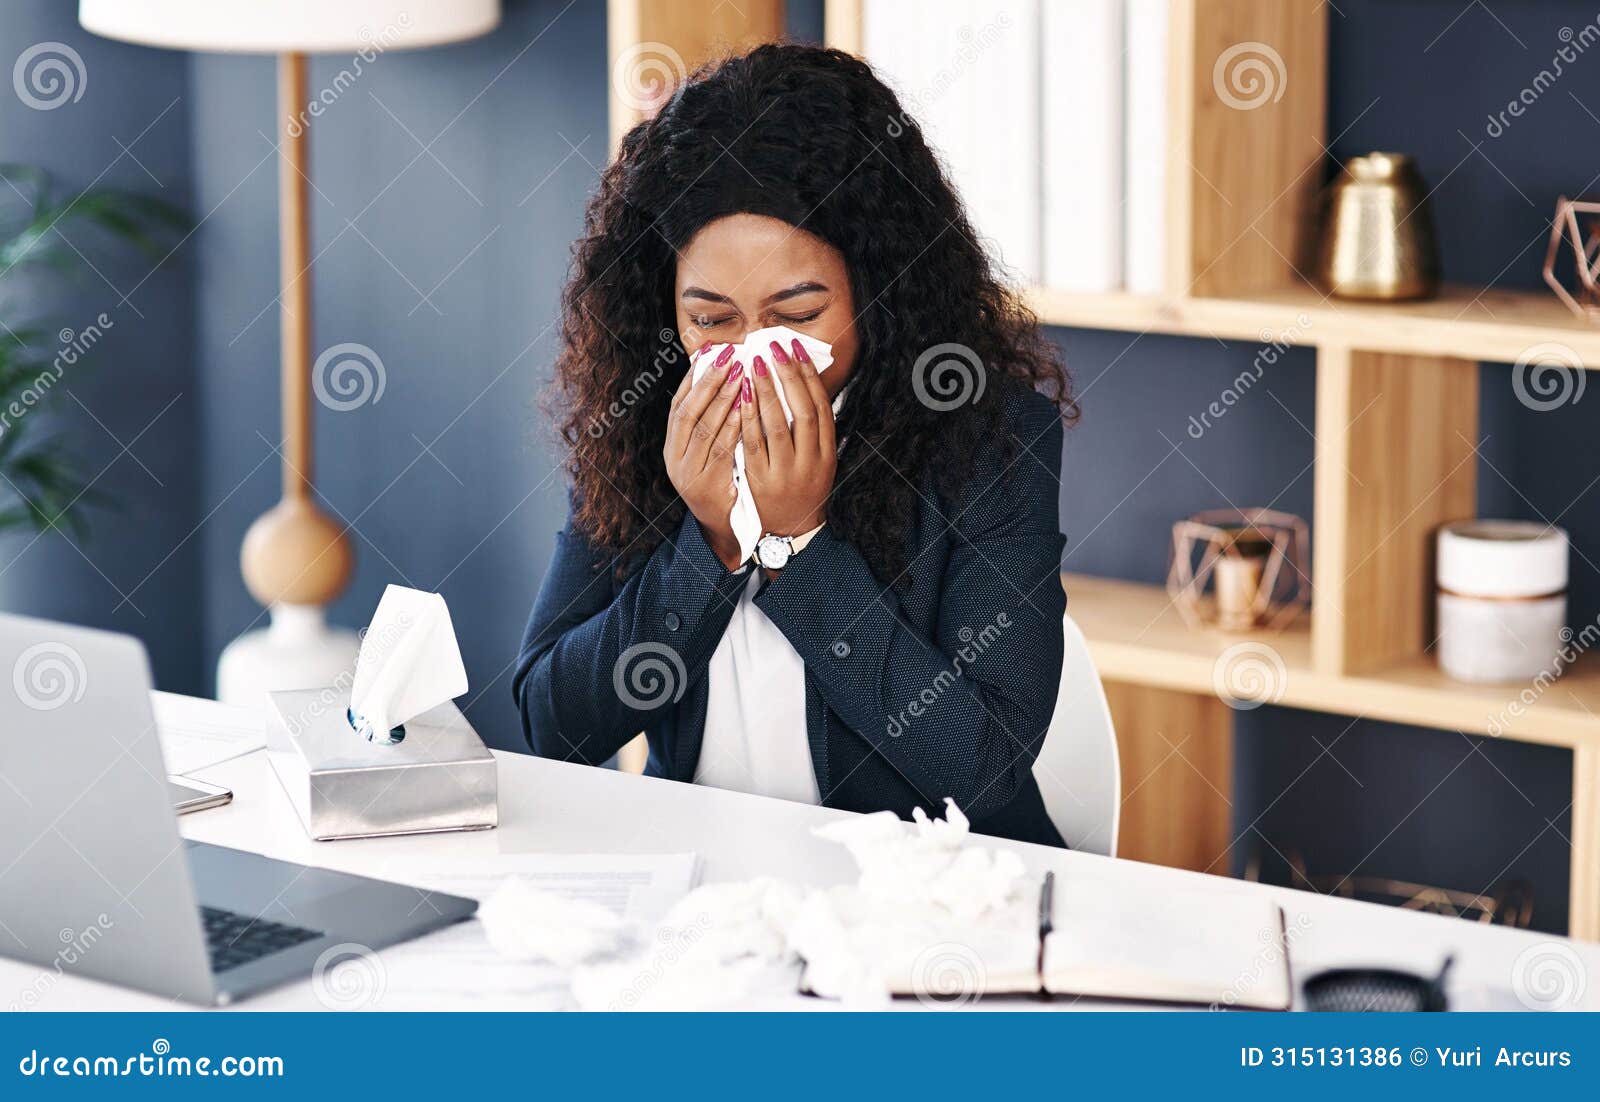 black woman, business and tissue or blowing nose in office for allergies sneeze, virus or hayfever. female person, sick